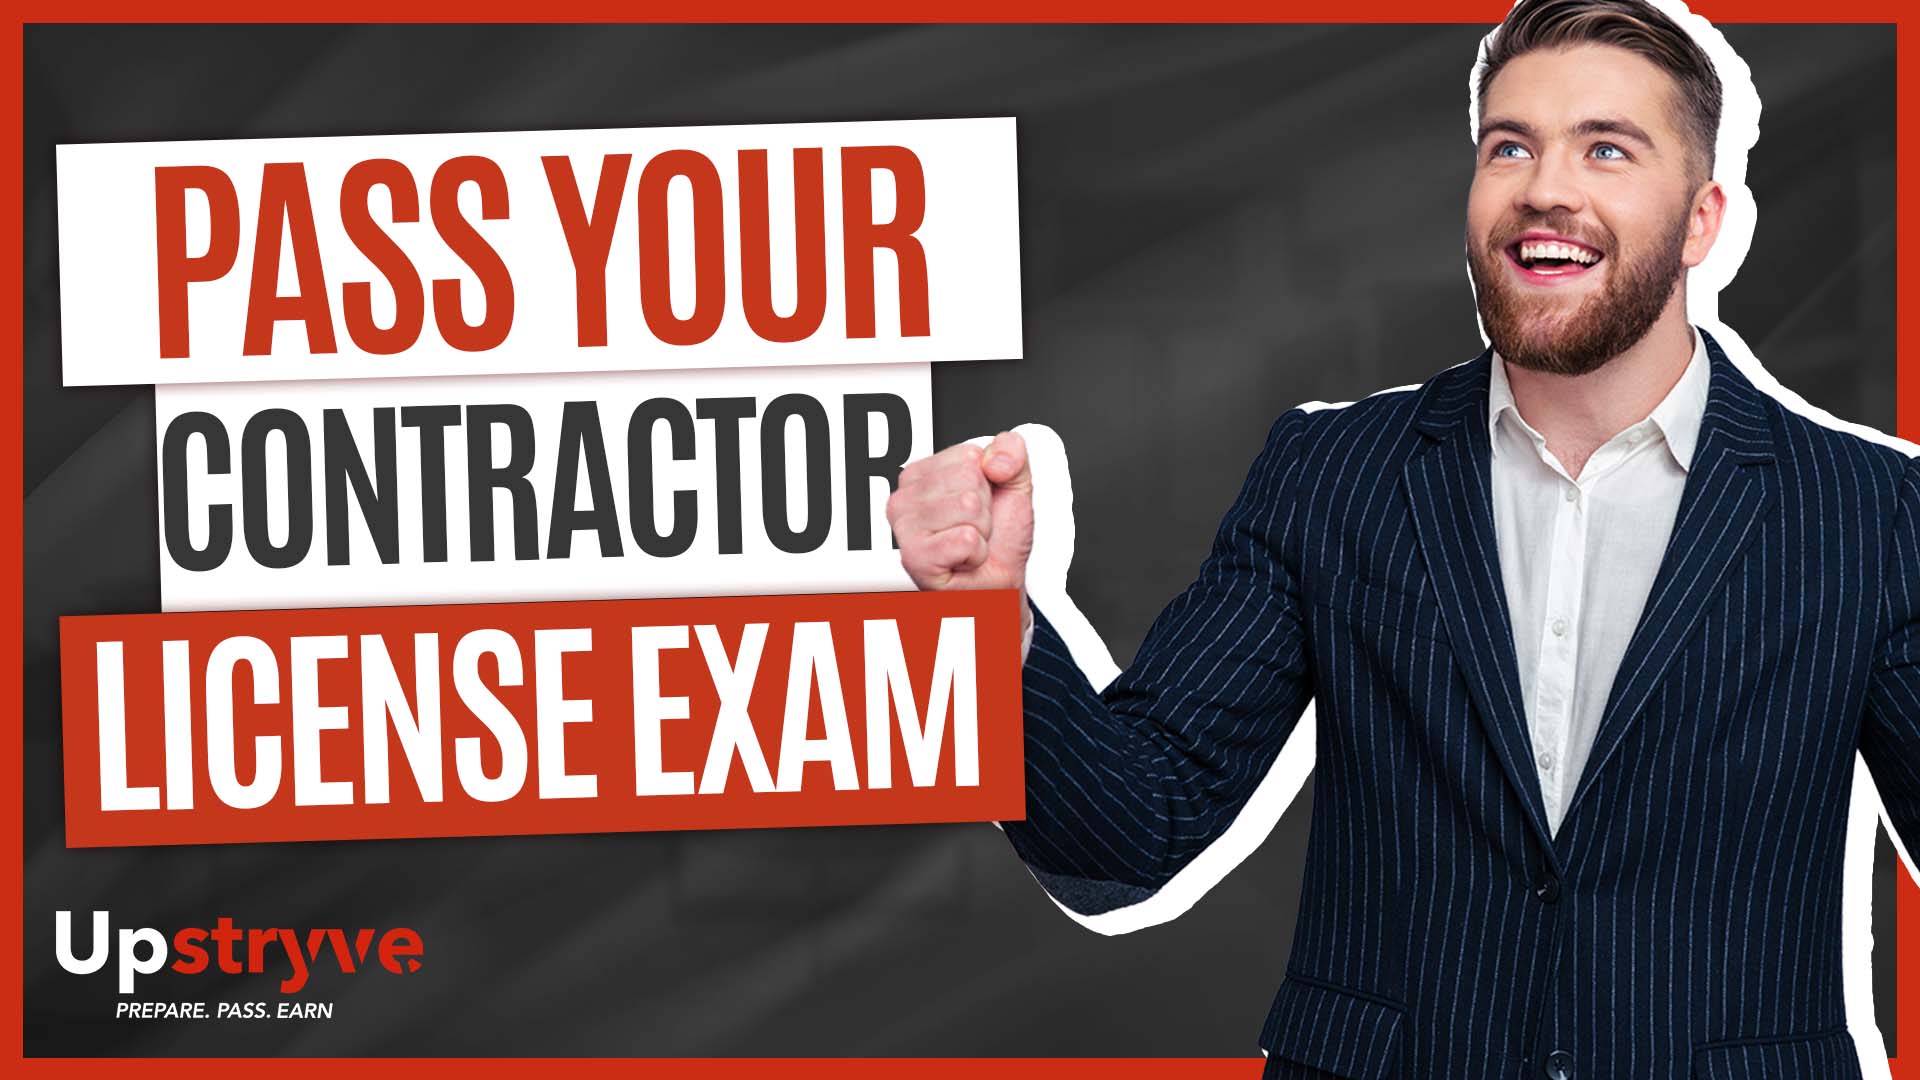 Connect with us today by calling 877-938-1888. In todays video we chat with licensing expert J.D. about the best first steps to take when considering taking your contractor license exam. All trade license exams are difficult and require effective preparation. J.D. goes over one of the many packages Upstryve offers their students in order for them to efficiently study for their exam and pass it on their first attempt. If you would like to learn more click on the links below.

Call us today: 877-938-1888
Website: https://www.upstryve.com​
Book Store: https://store.upstryve.com